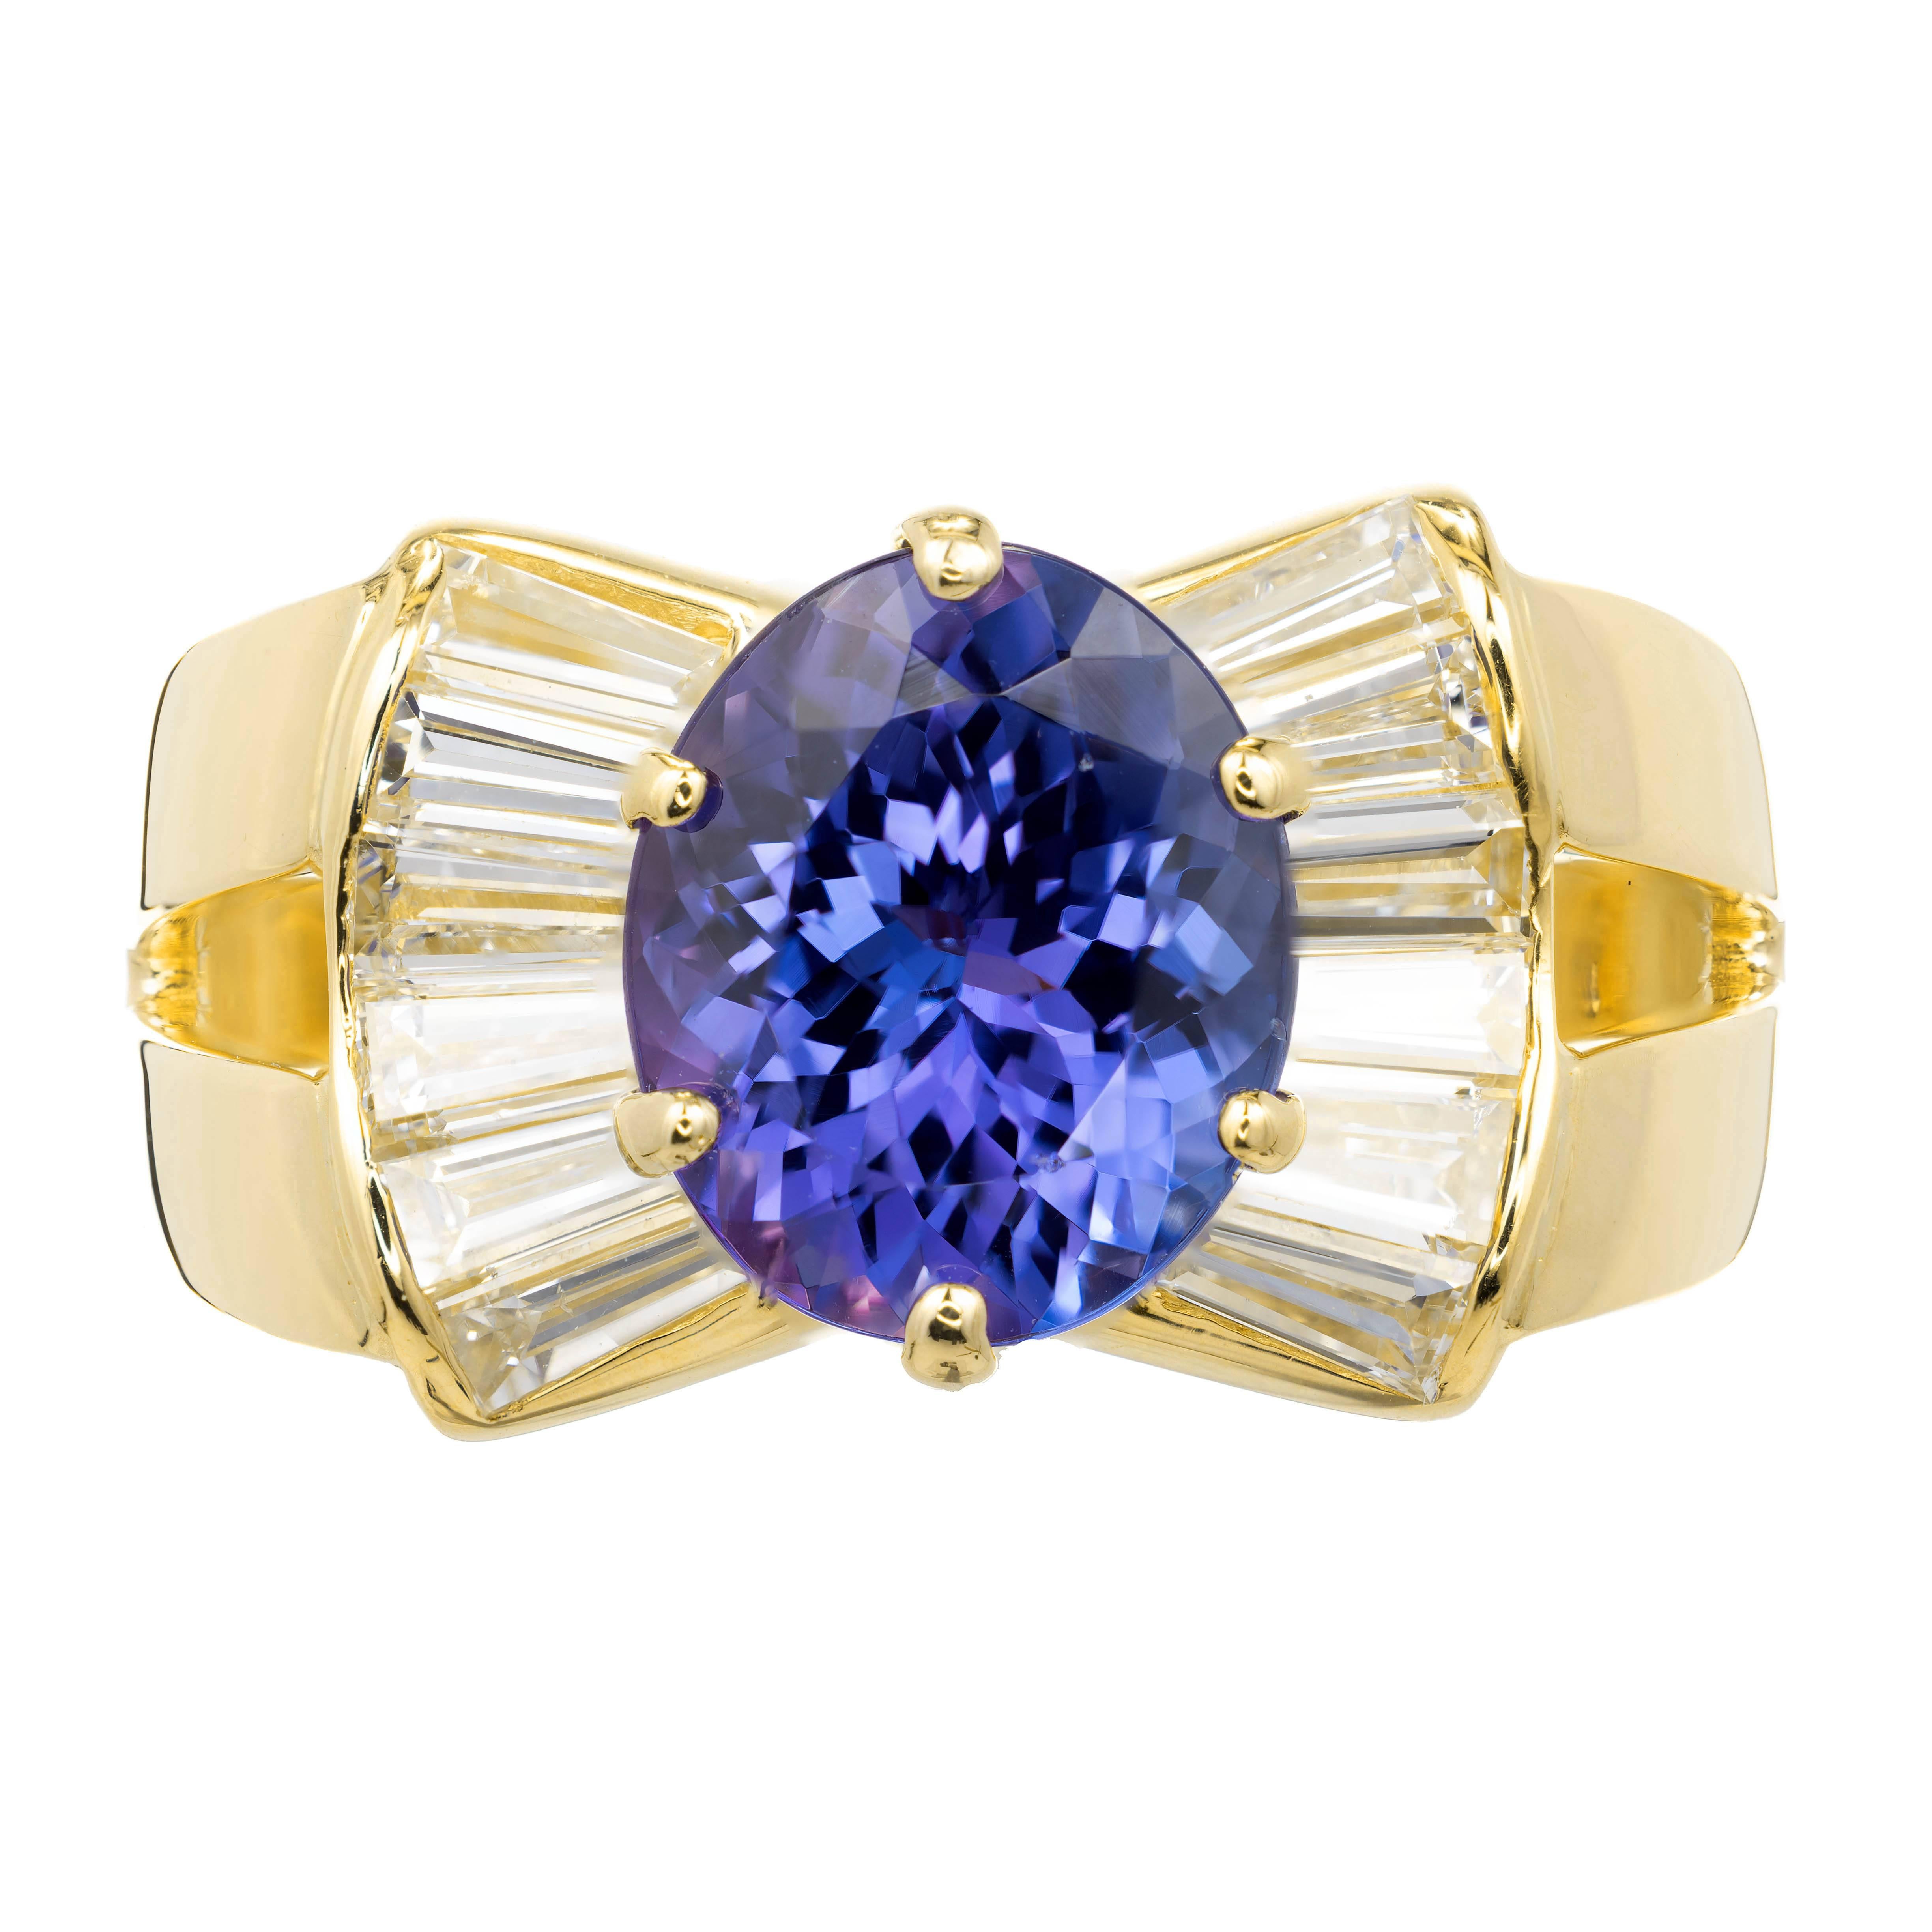 Tanzanite and diamond cocktail ring. Well-polished 3.38ct oval tanzanite in a 18k yellow gold setting with tapered baguette side diamonds. 

1 oval purplish blue Tanzanite, approx. total weight 3.38cts, VS
12 tapered baguette diamonds, approx. total